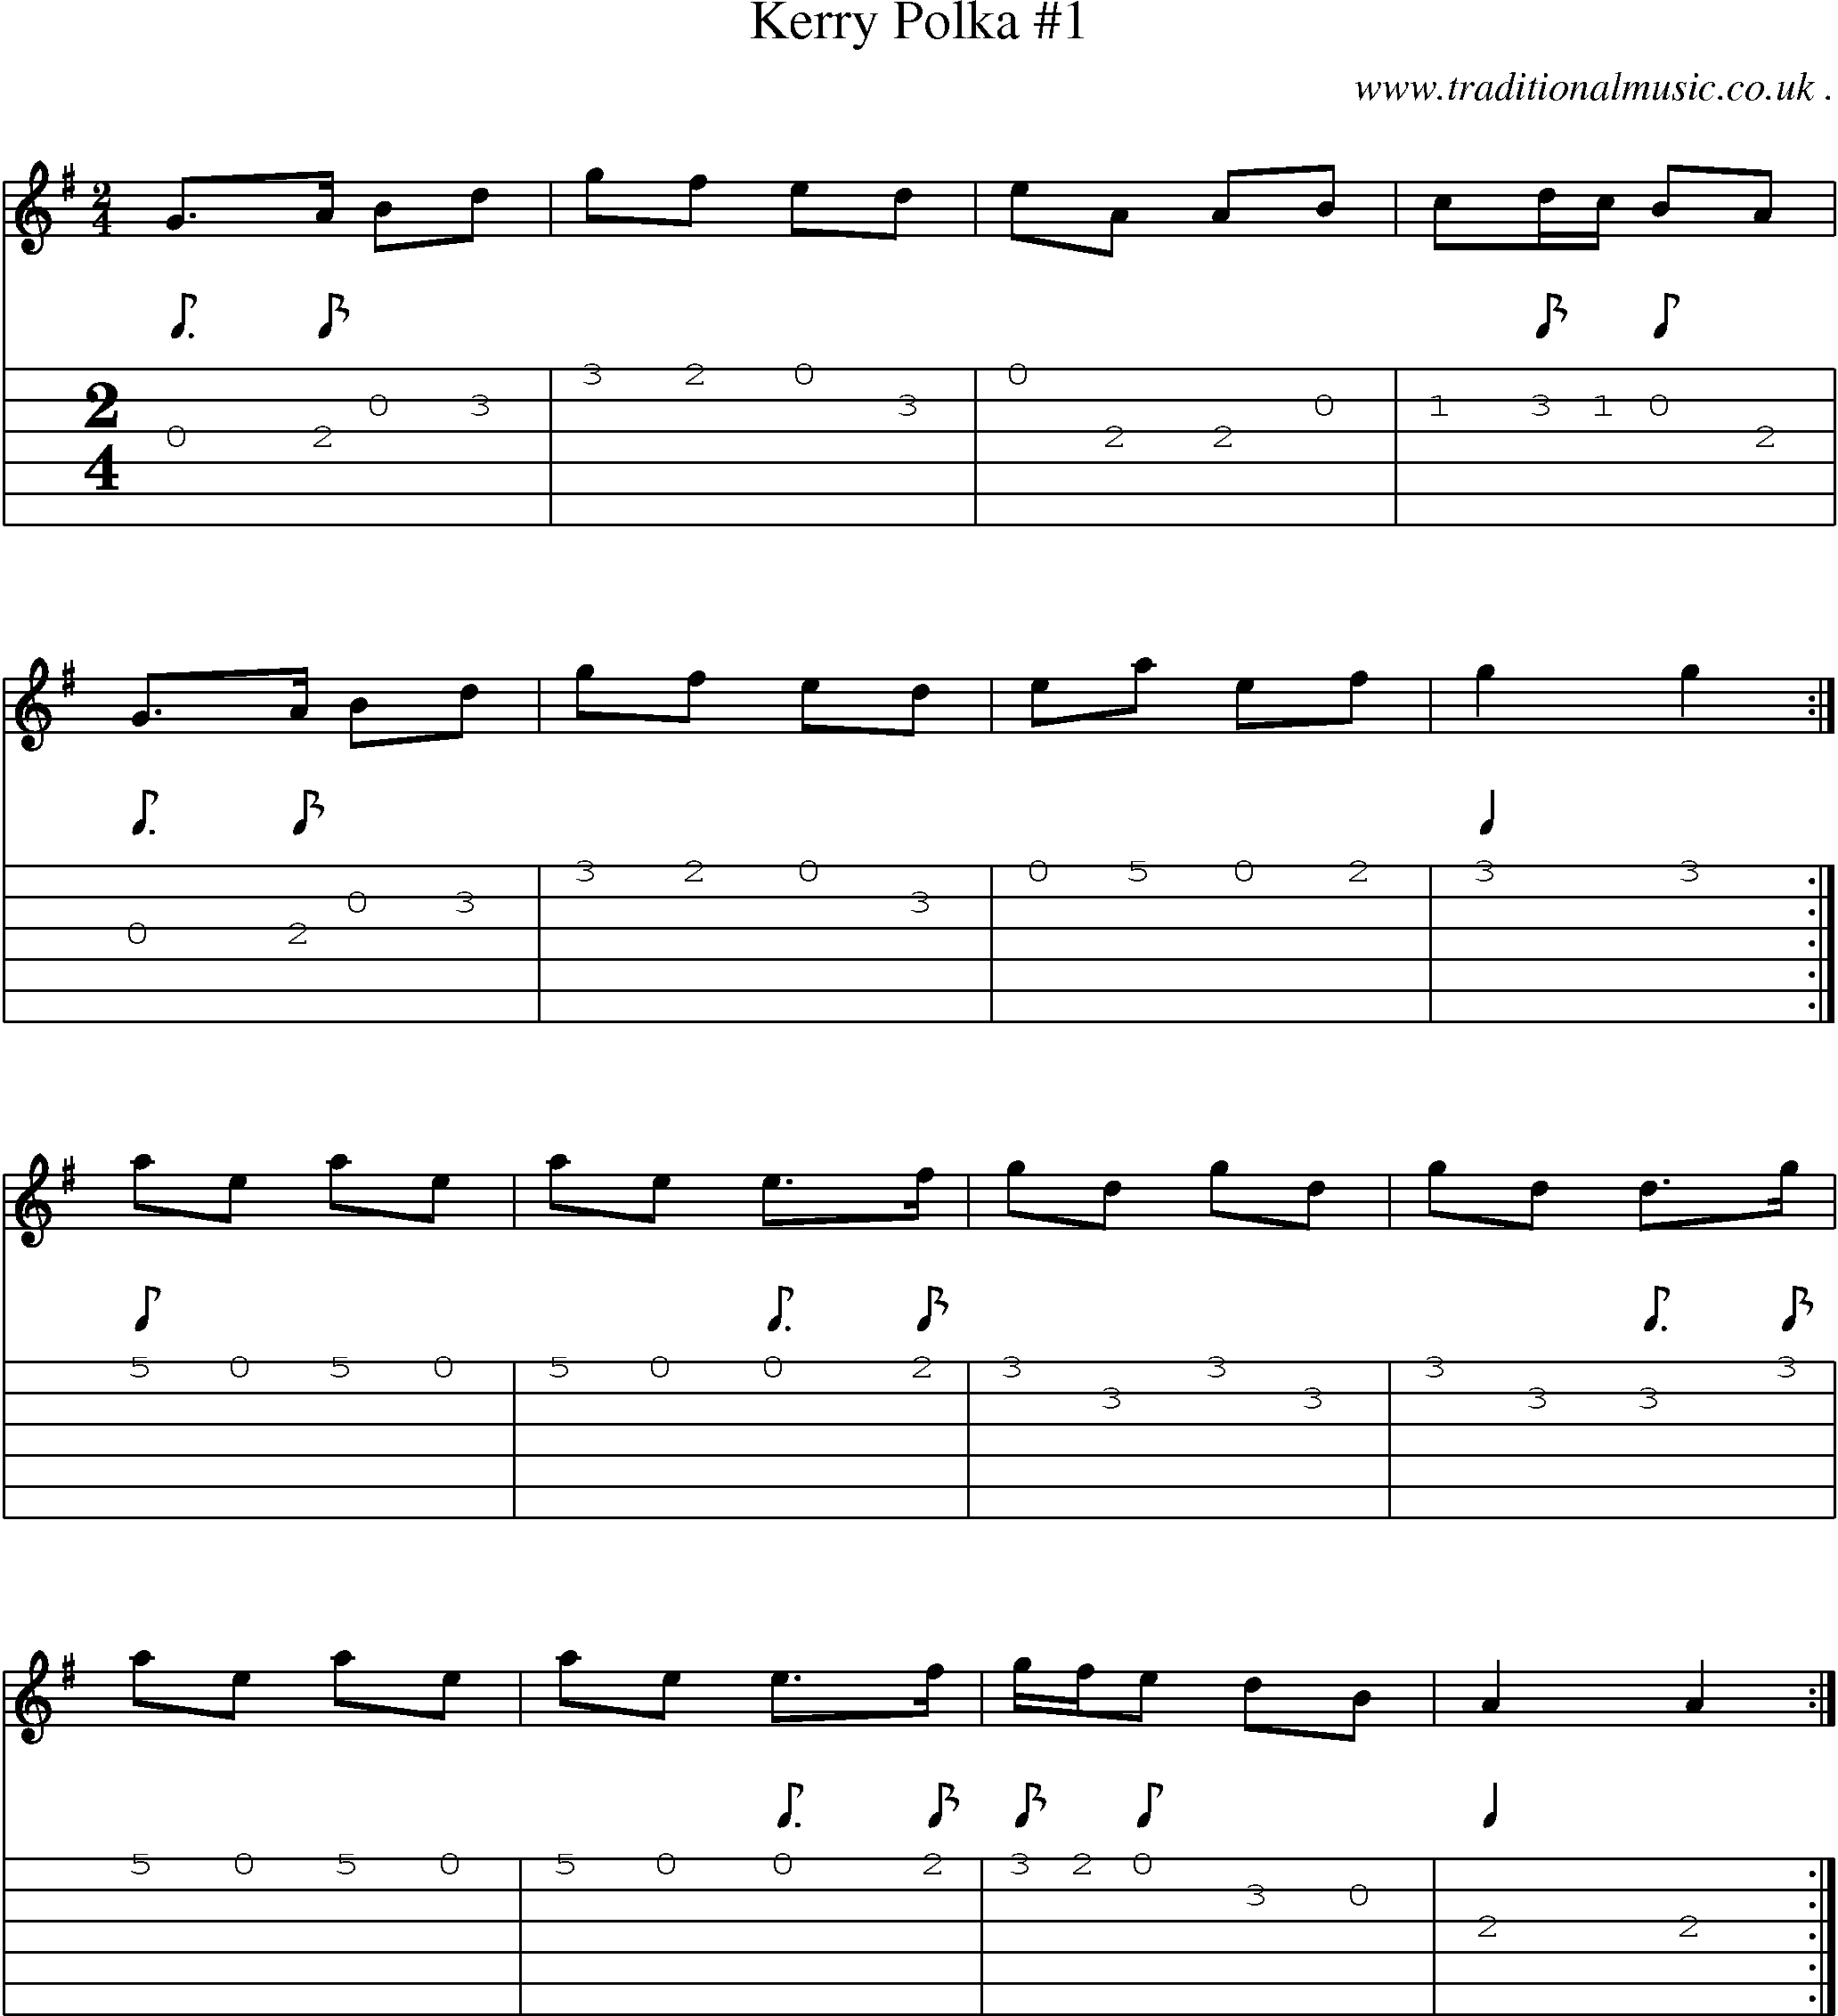 Sheet-Music and Guitar Tabs for Kerry Polka 1